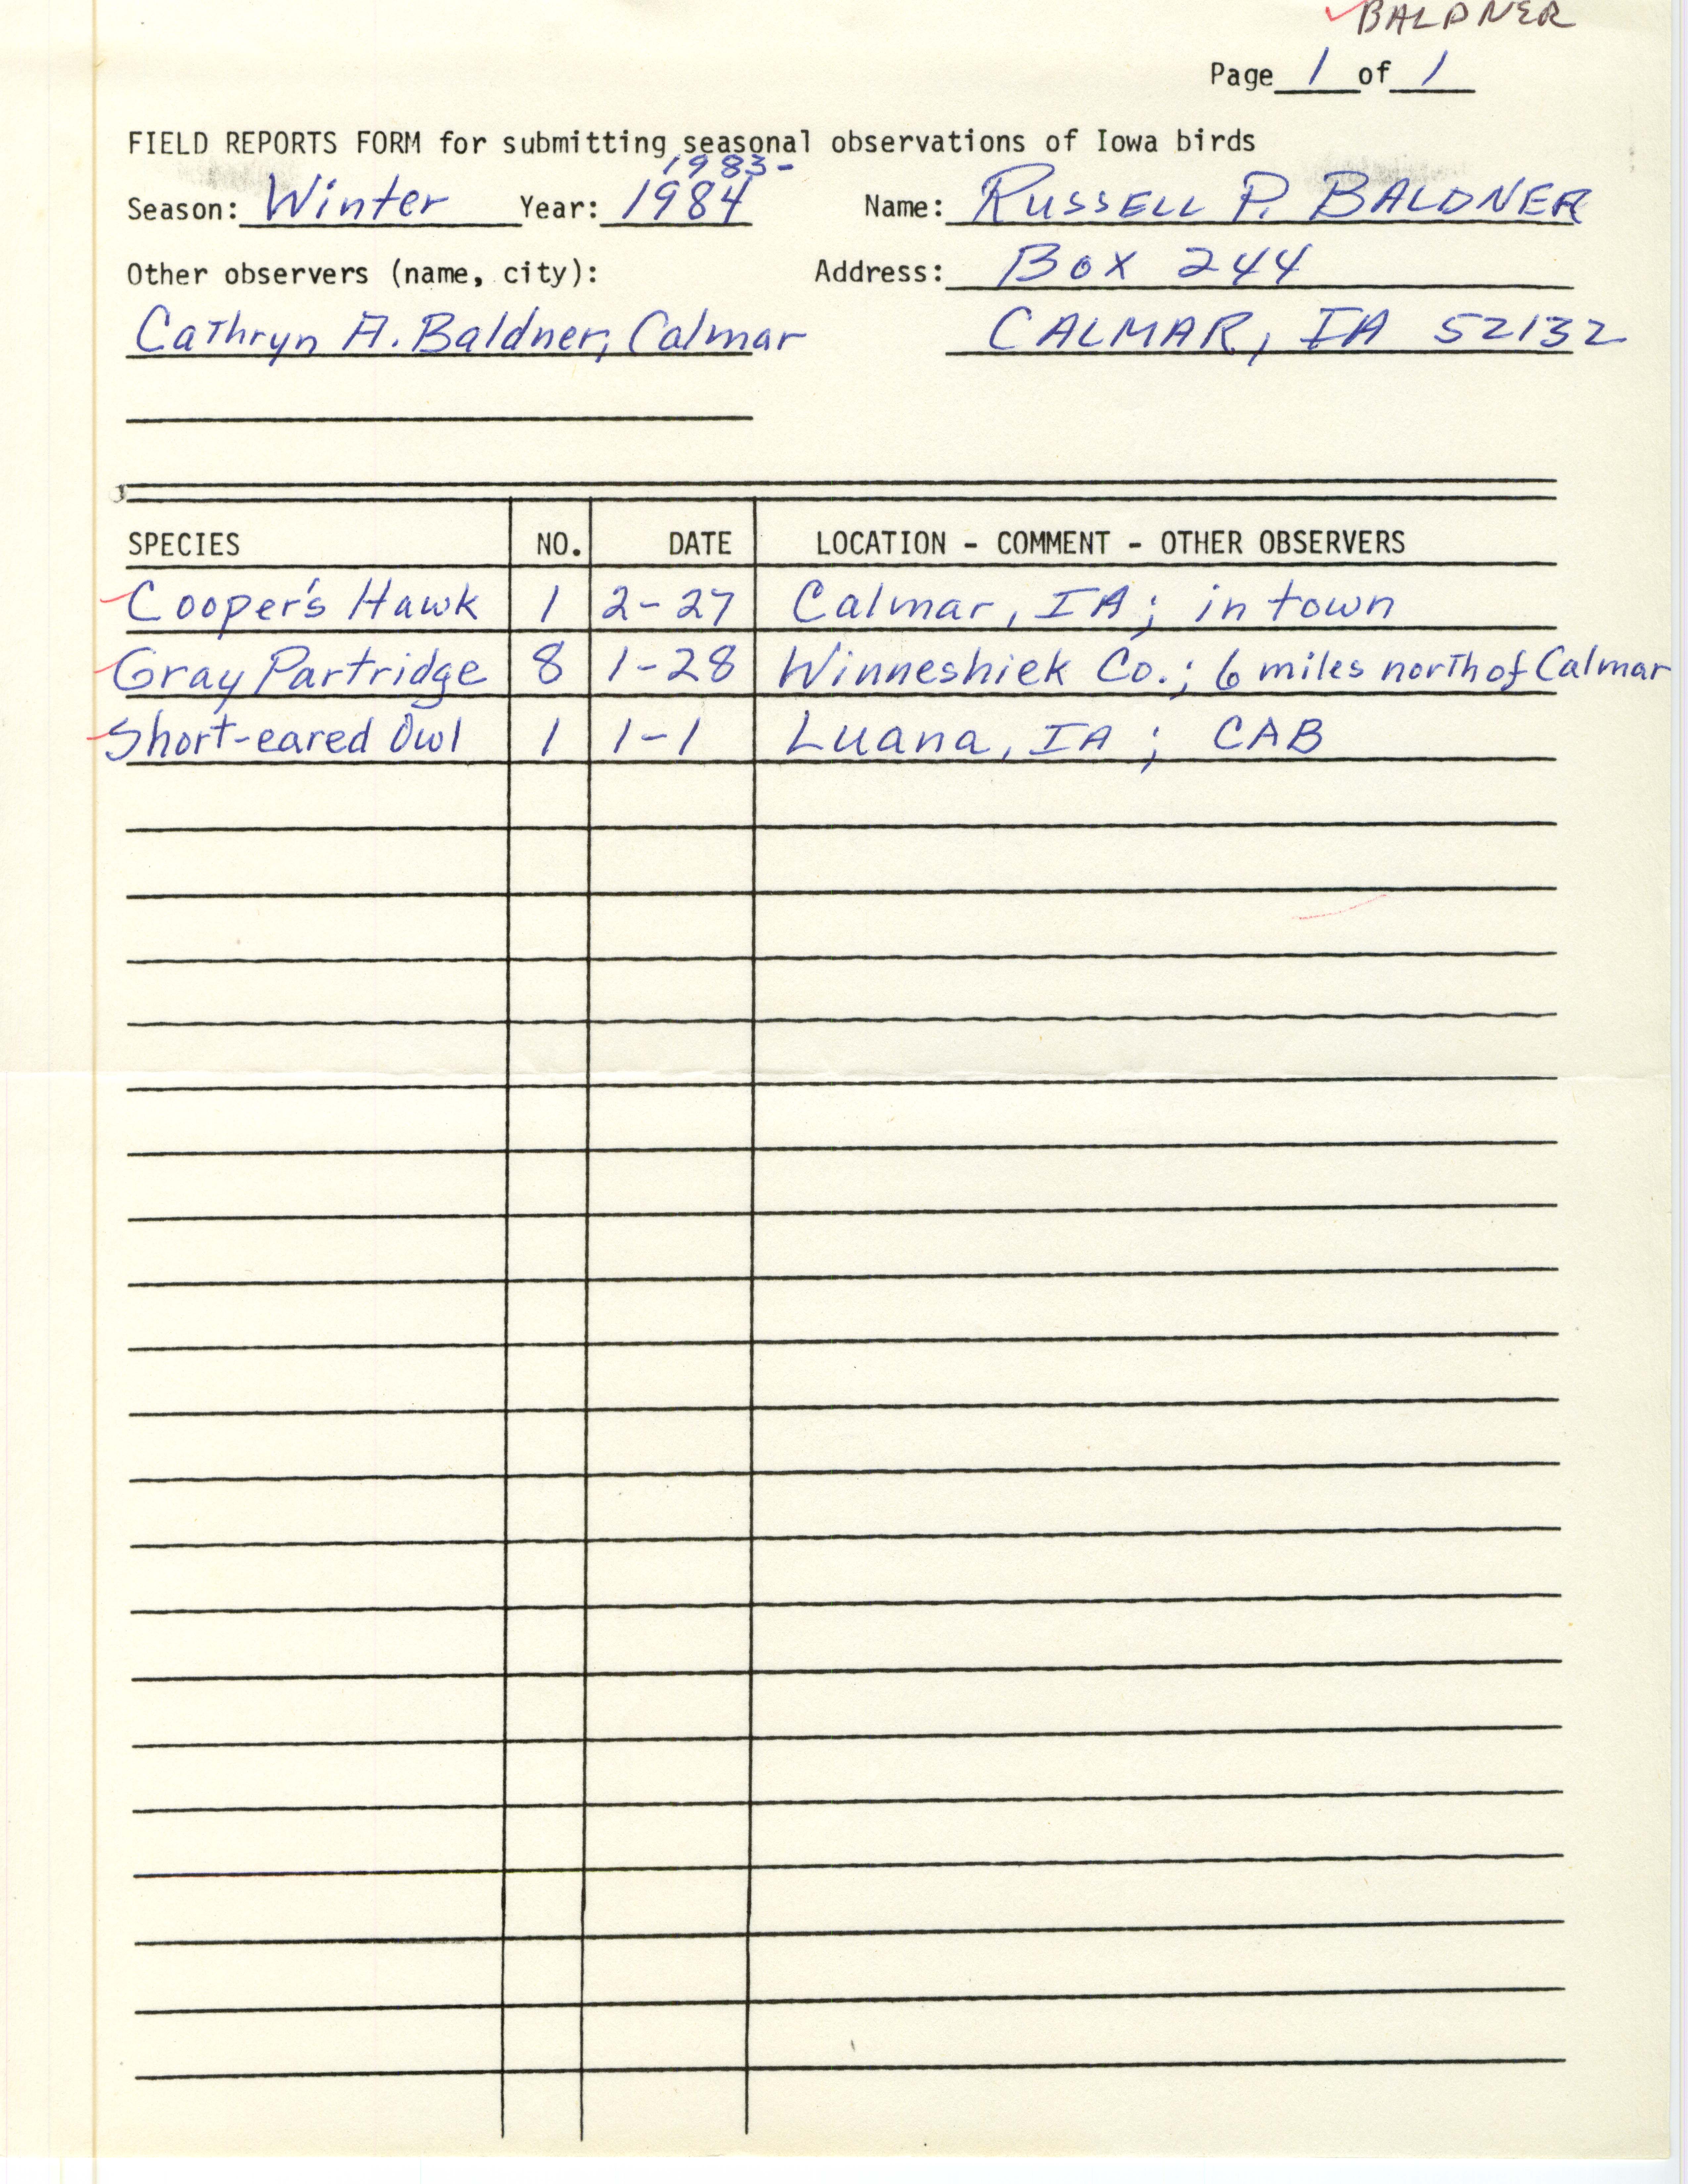 Field notes contributed by Russell P. Baldner, winter 1983-1984